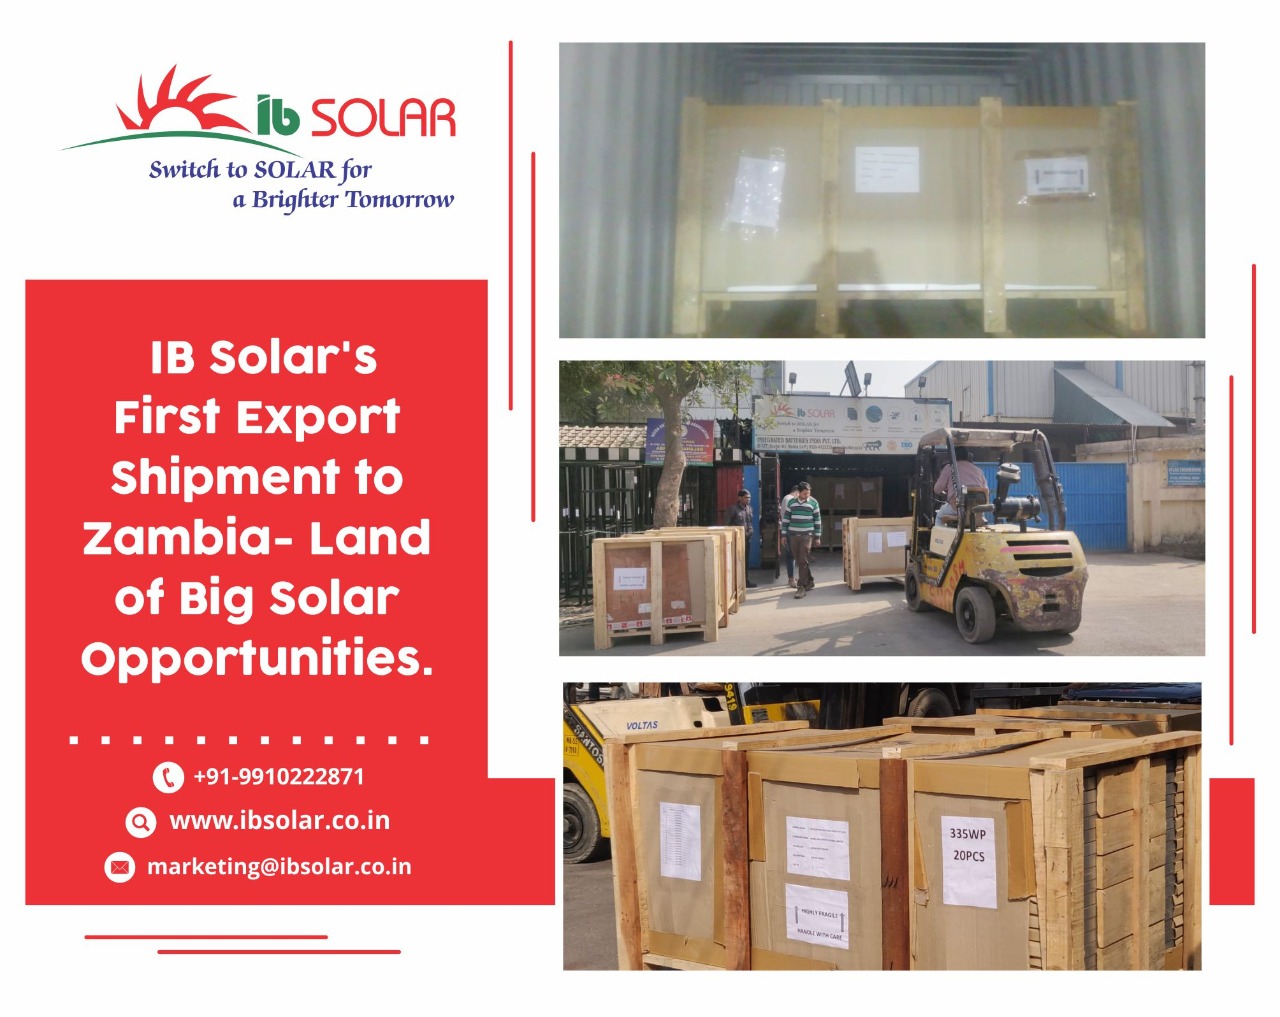 IB Solar’s first export shipment to Zambia – Land of big solar opportunities.